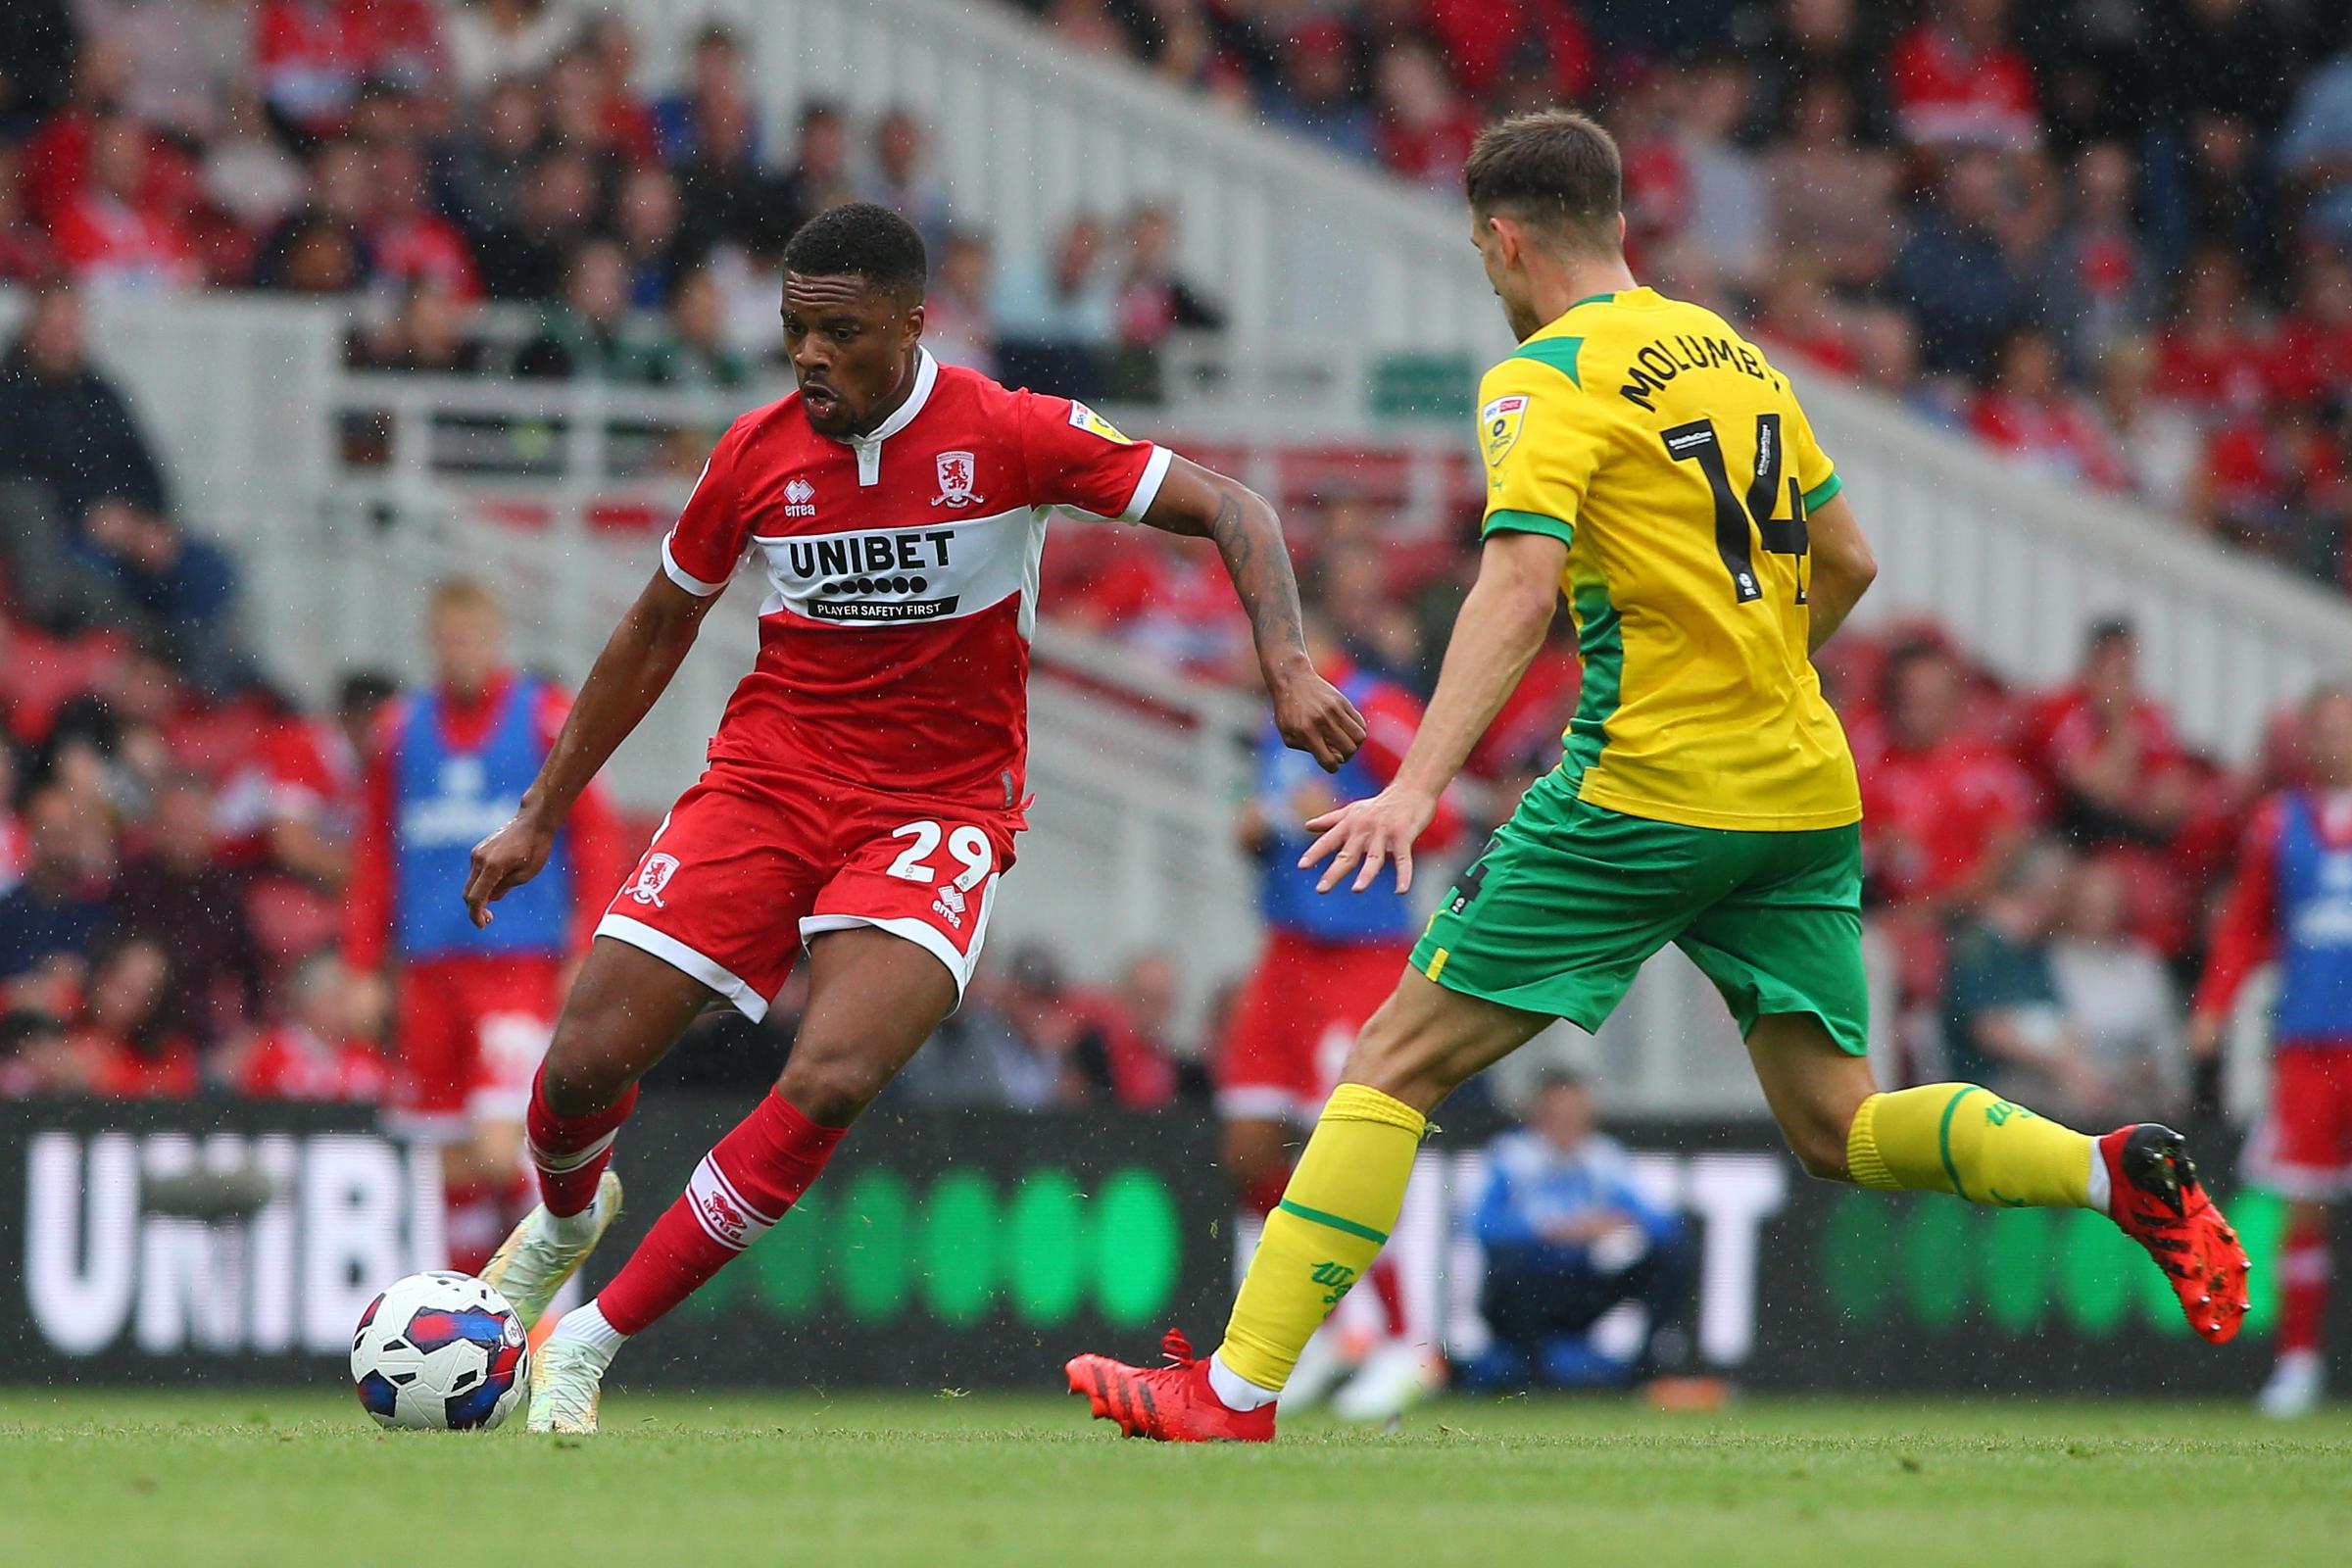 Boro need a win against Coventry City - what team will Chris Wilder pick?